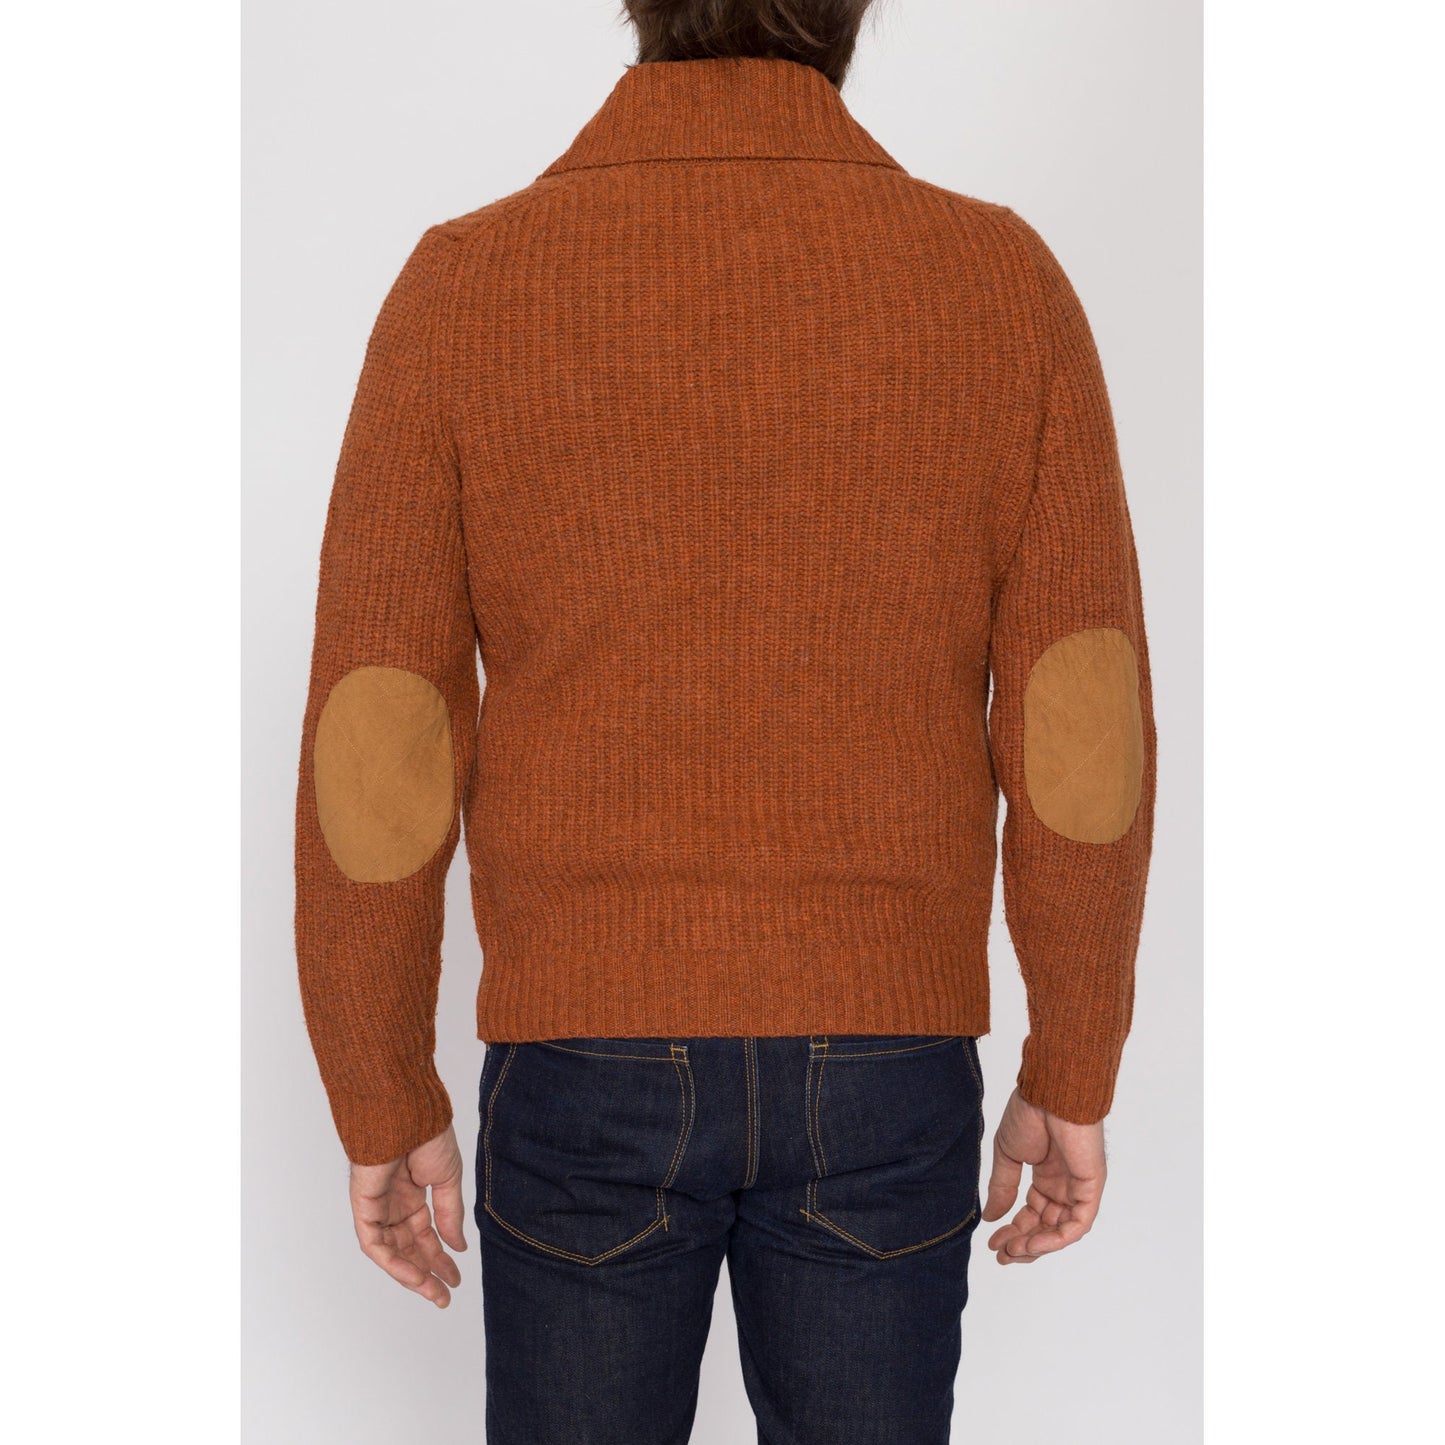 Medium 70s Orange Shawl Collar Elbow Patch Sweater | Vintage Marled Knit Wool Blend Collared Pullover